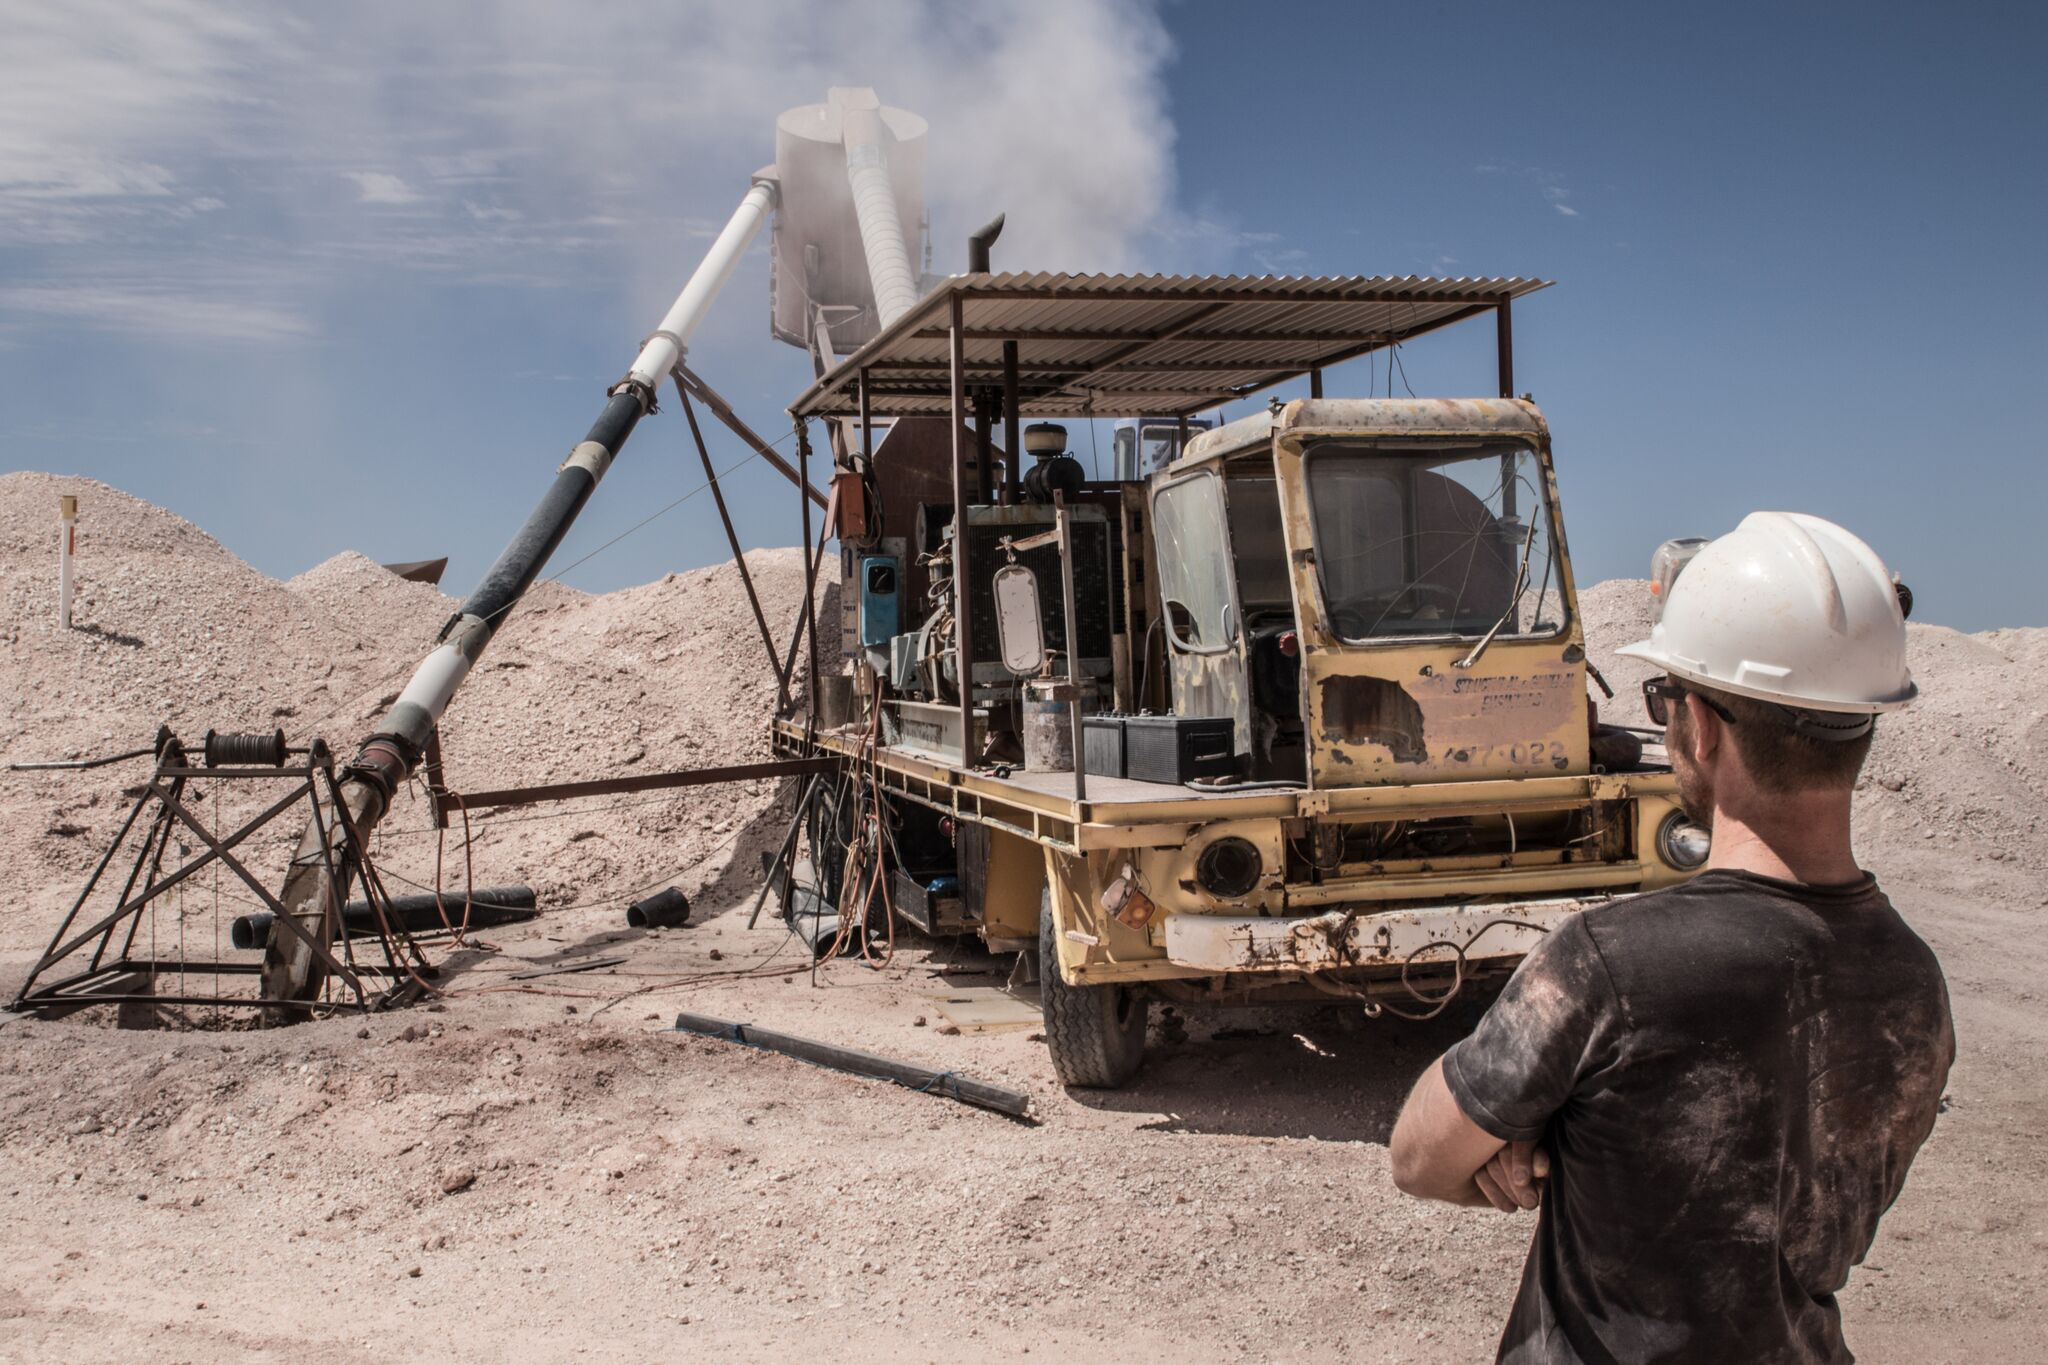 A man mining for opal in Coober Pedy, the biggest opal mine in the world